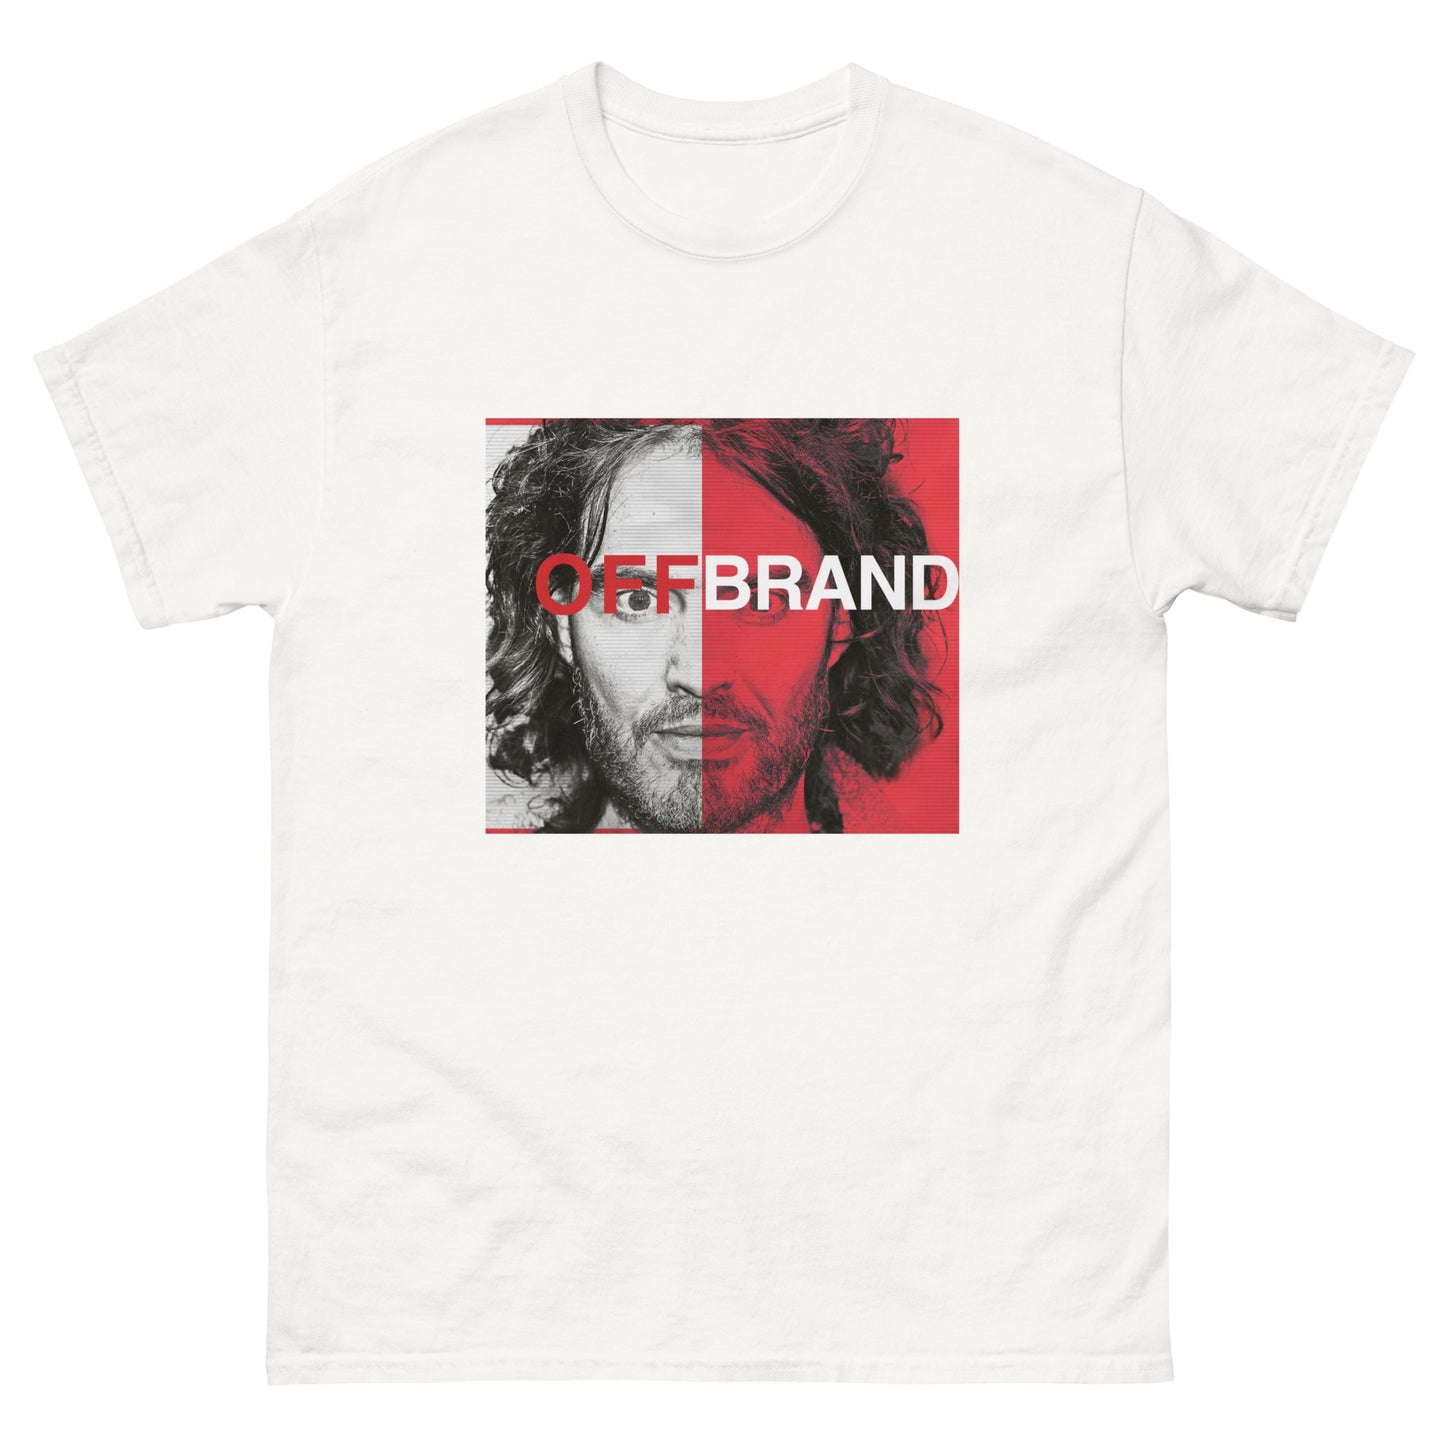 Off Brand (The Russell Brand T-Shirt)